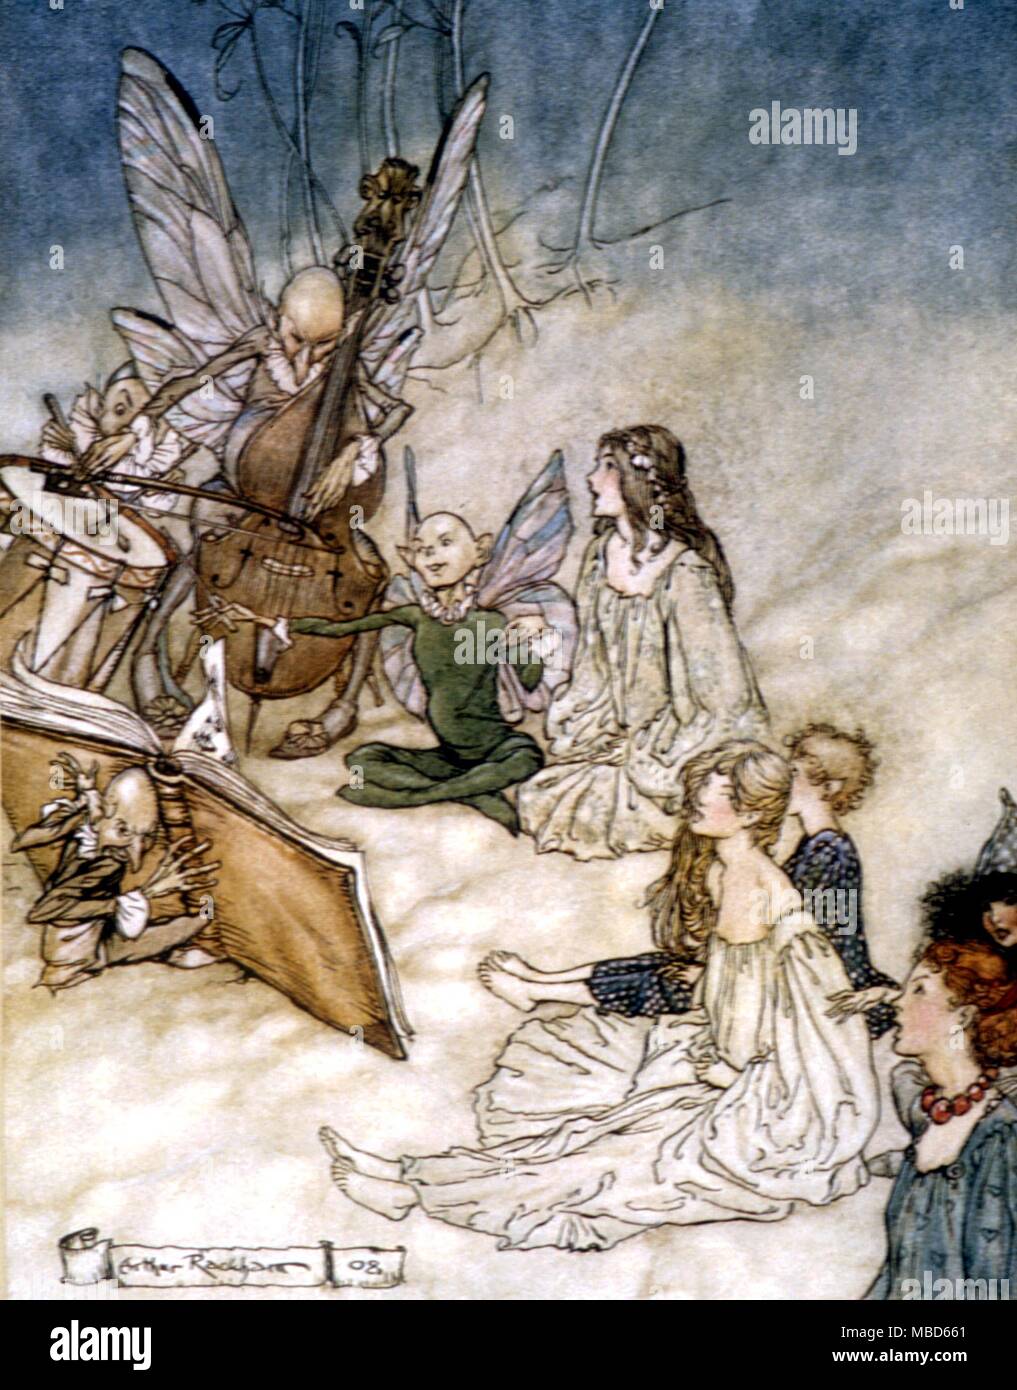 Fairy Tales - Midsummer Night's Dream - And a fairy song. Illustration by Arthur Rackham for the 1908 edition of A Midsummer Night's Dream, by Shakespeare Stock Photo